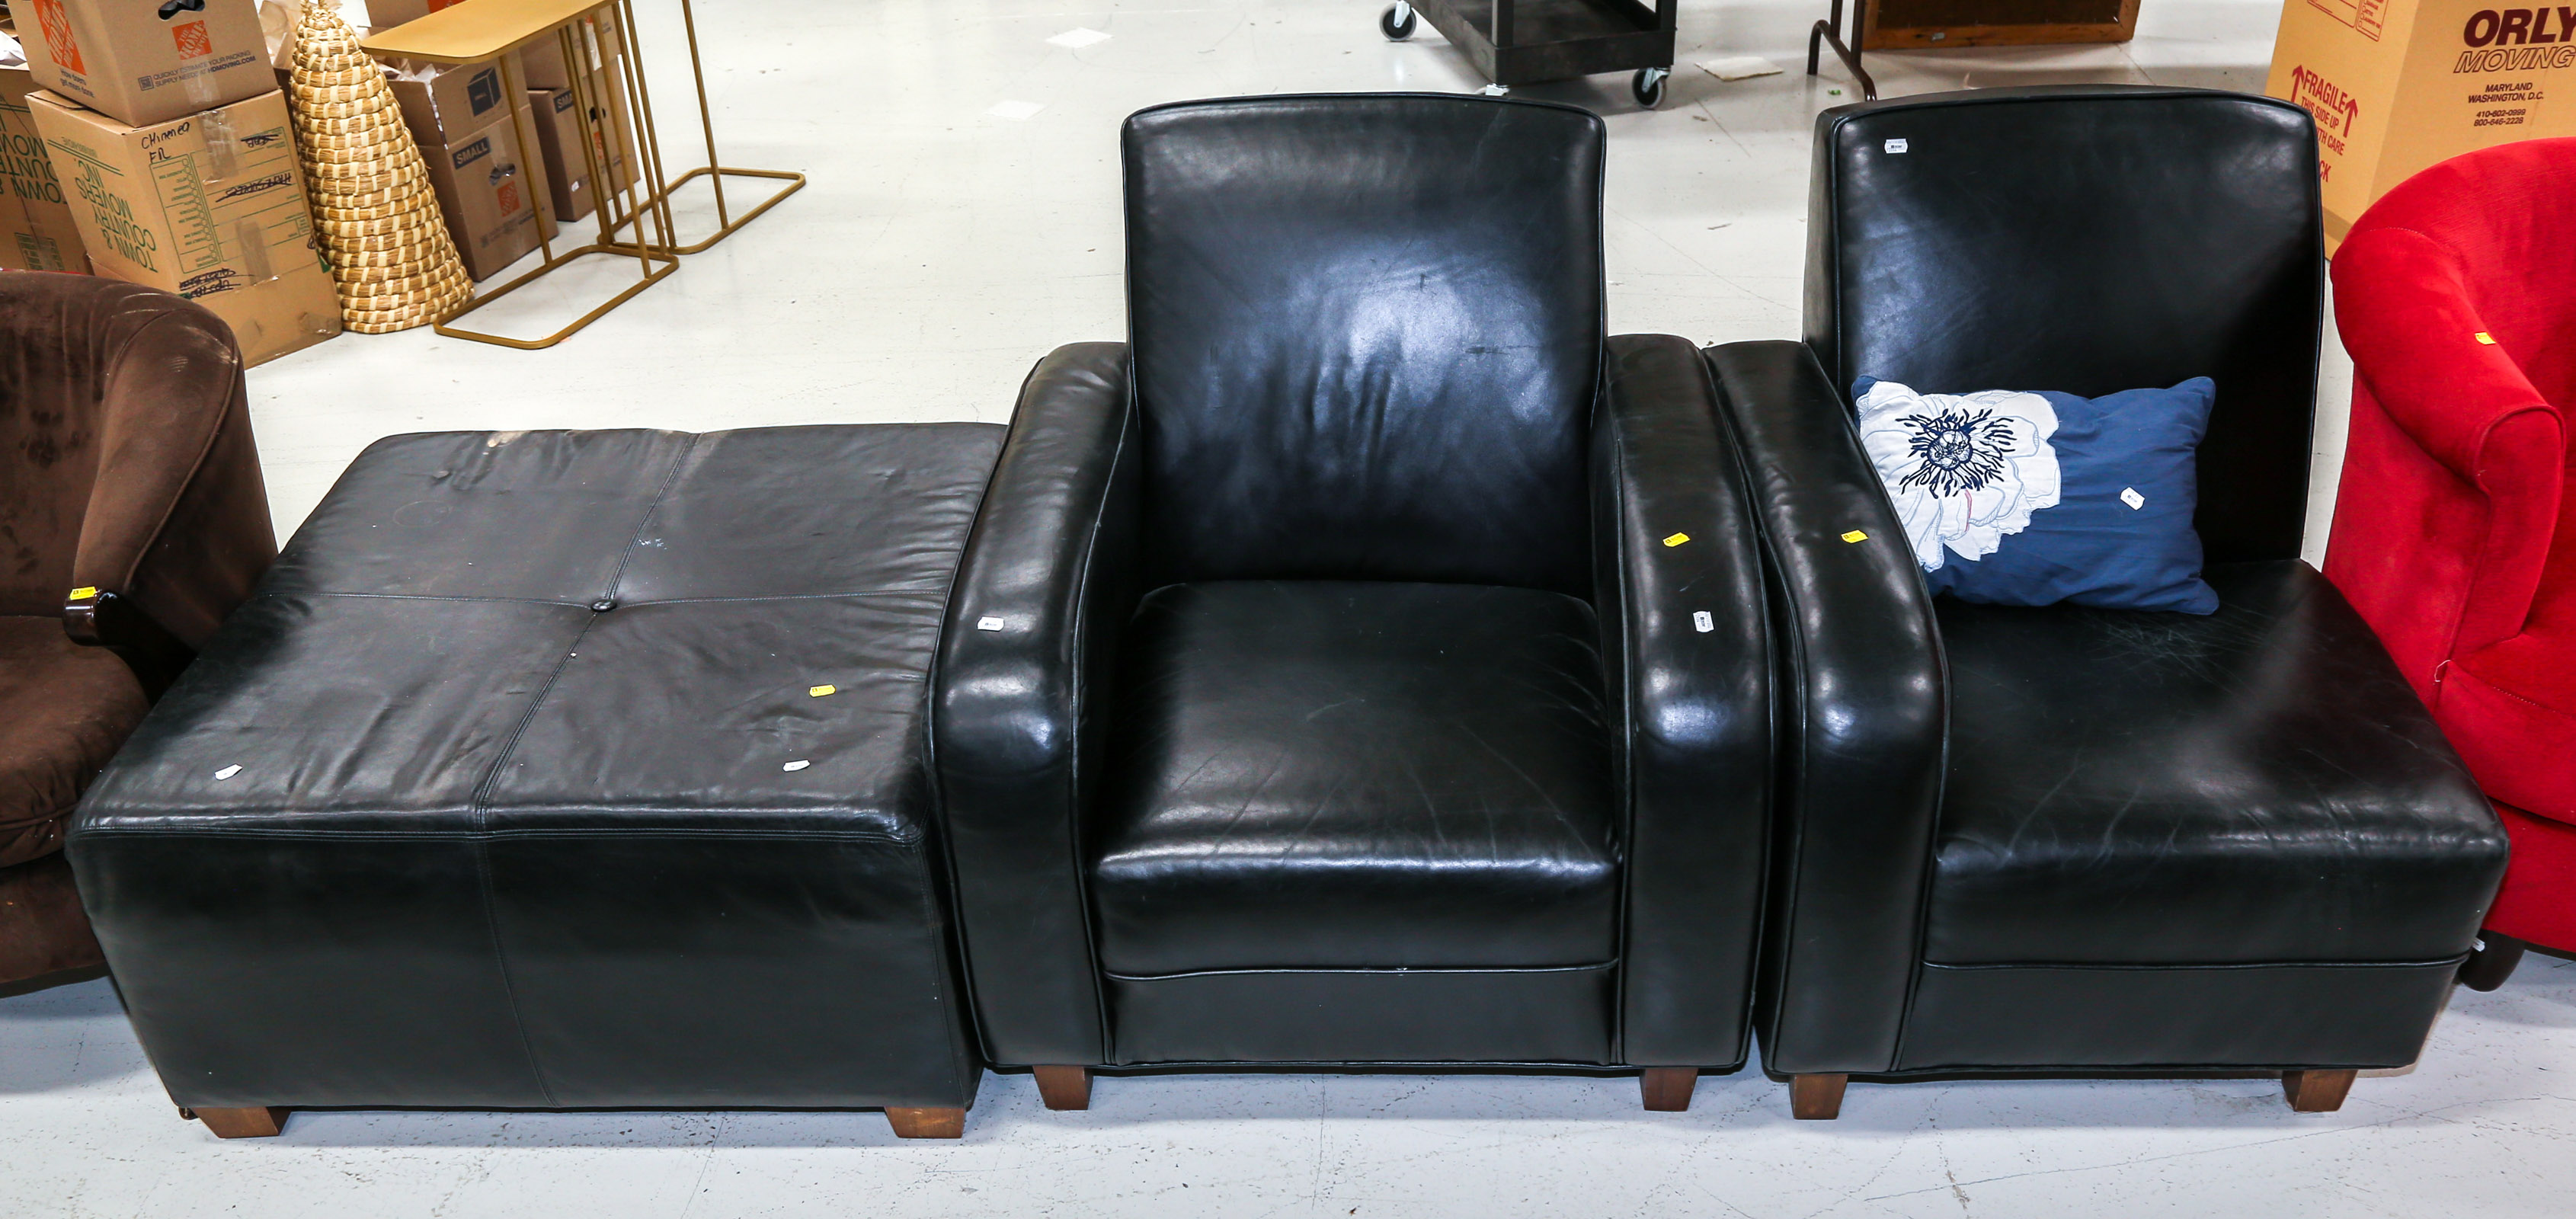 TWO ART DECO STYLE LOUNGE CHAIRS 354af8